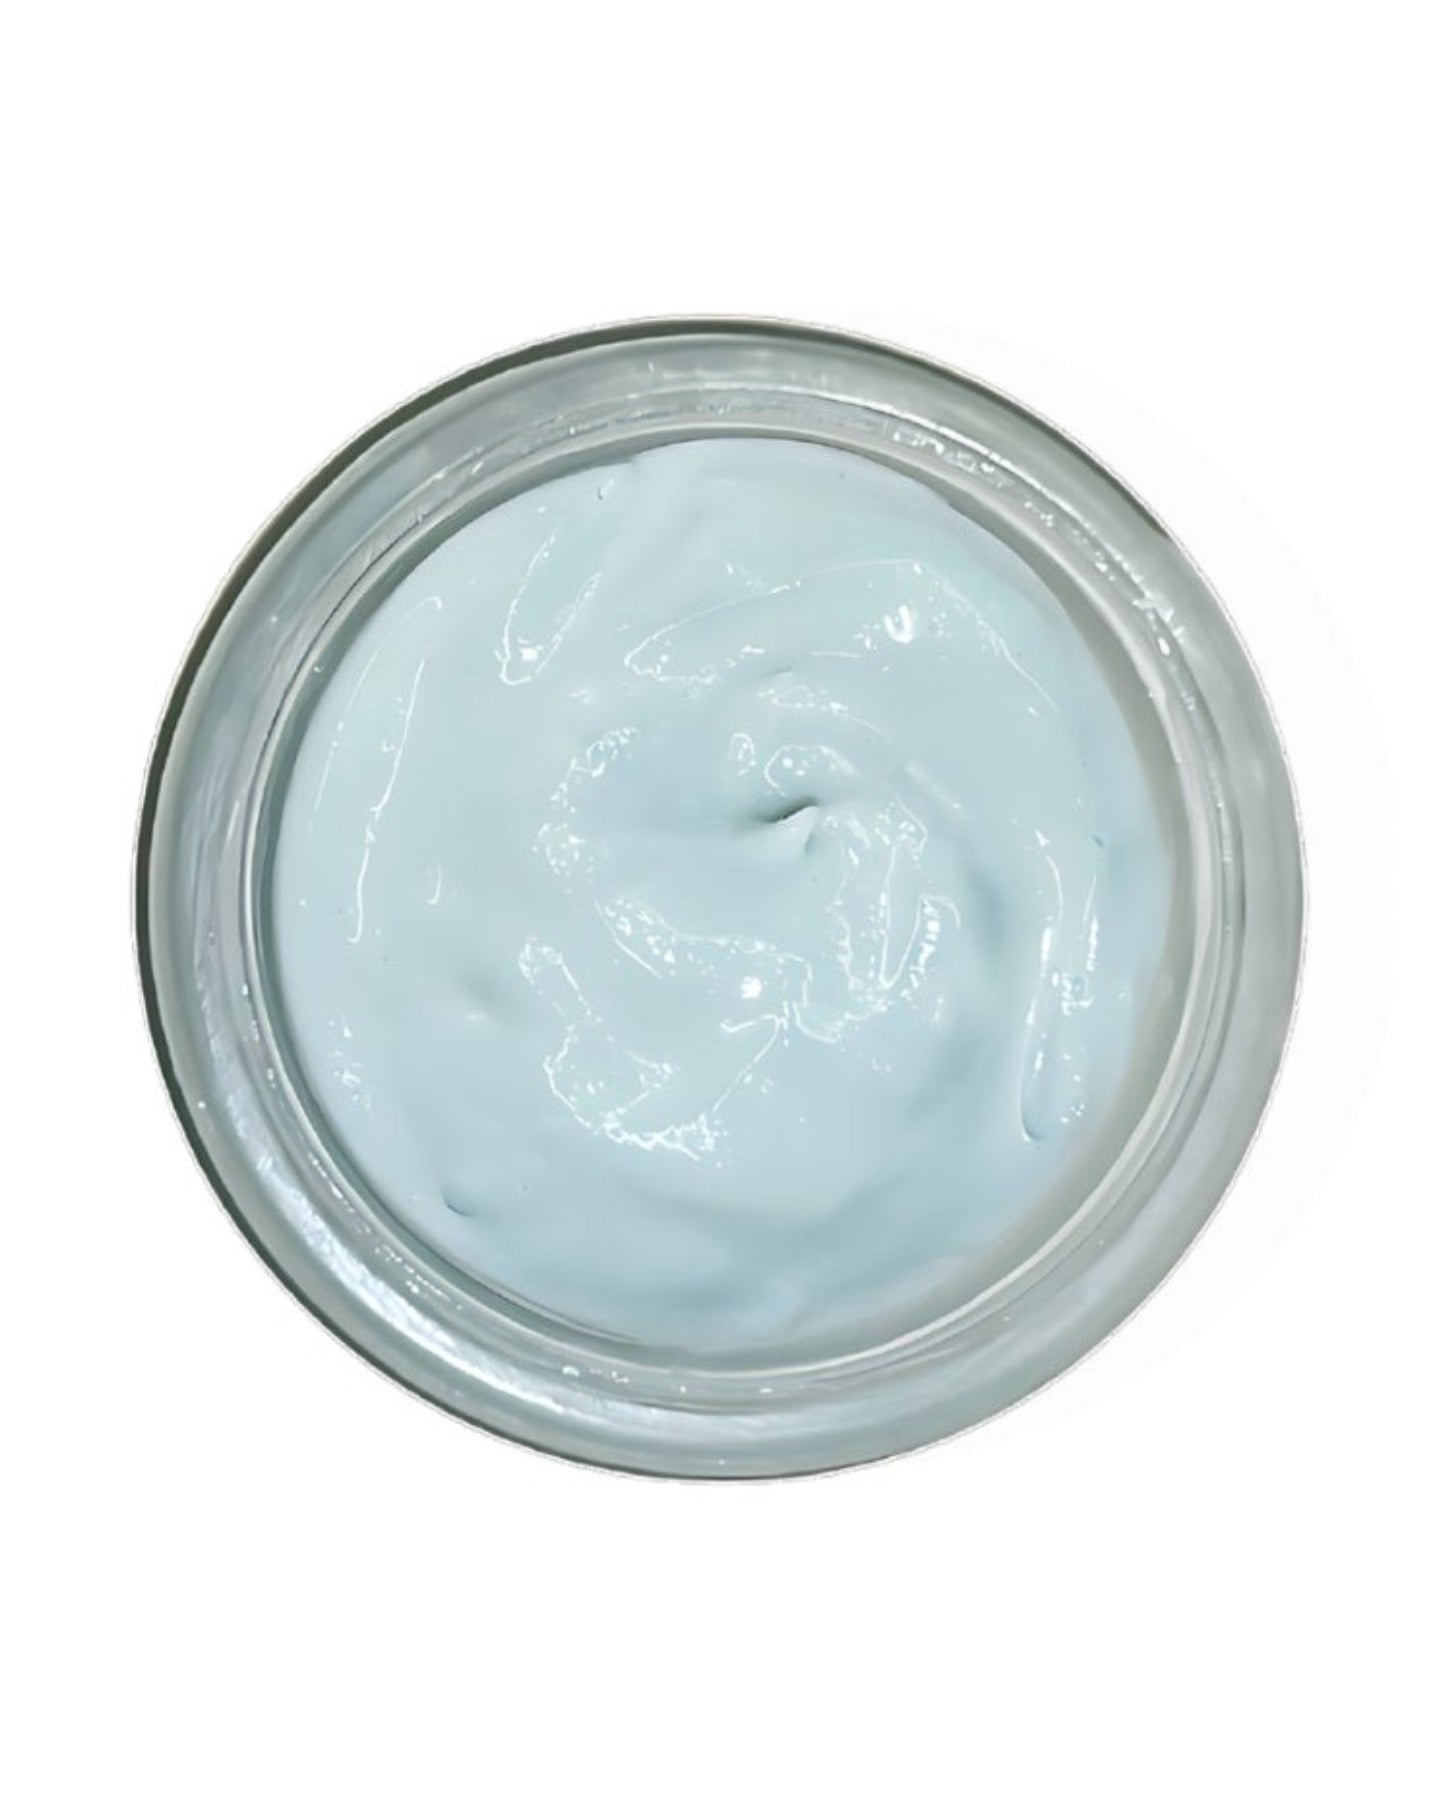 A close-up shot of the Blue Tansy Ultra Rich Moisturizer, enlarged to show texture.